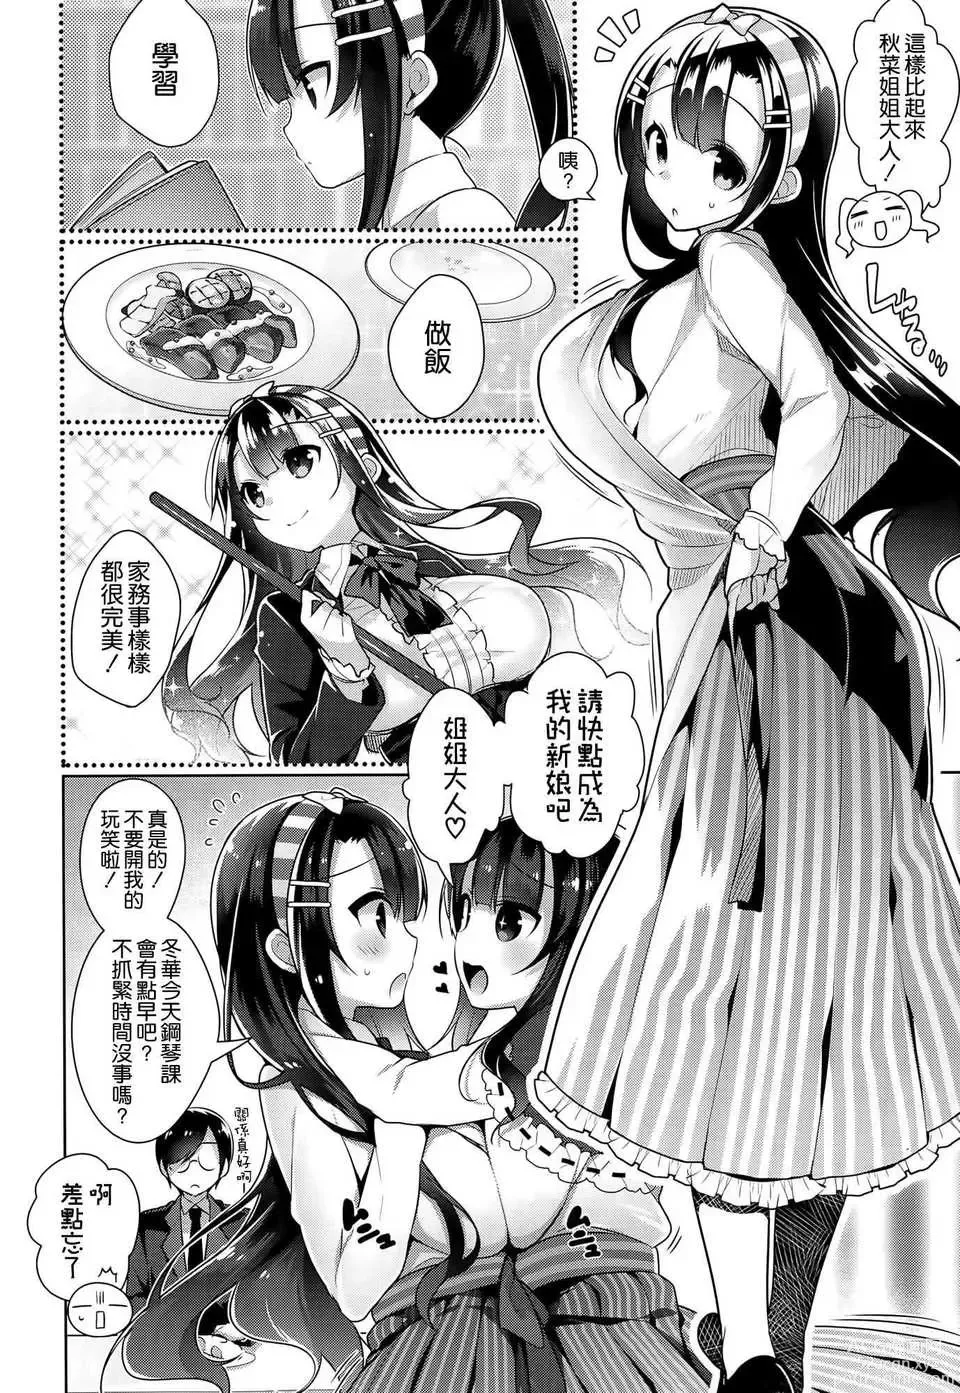 Page 6 of manga Aki na Dere - Mysterious the forbidden carnal relationship